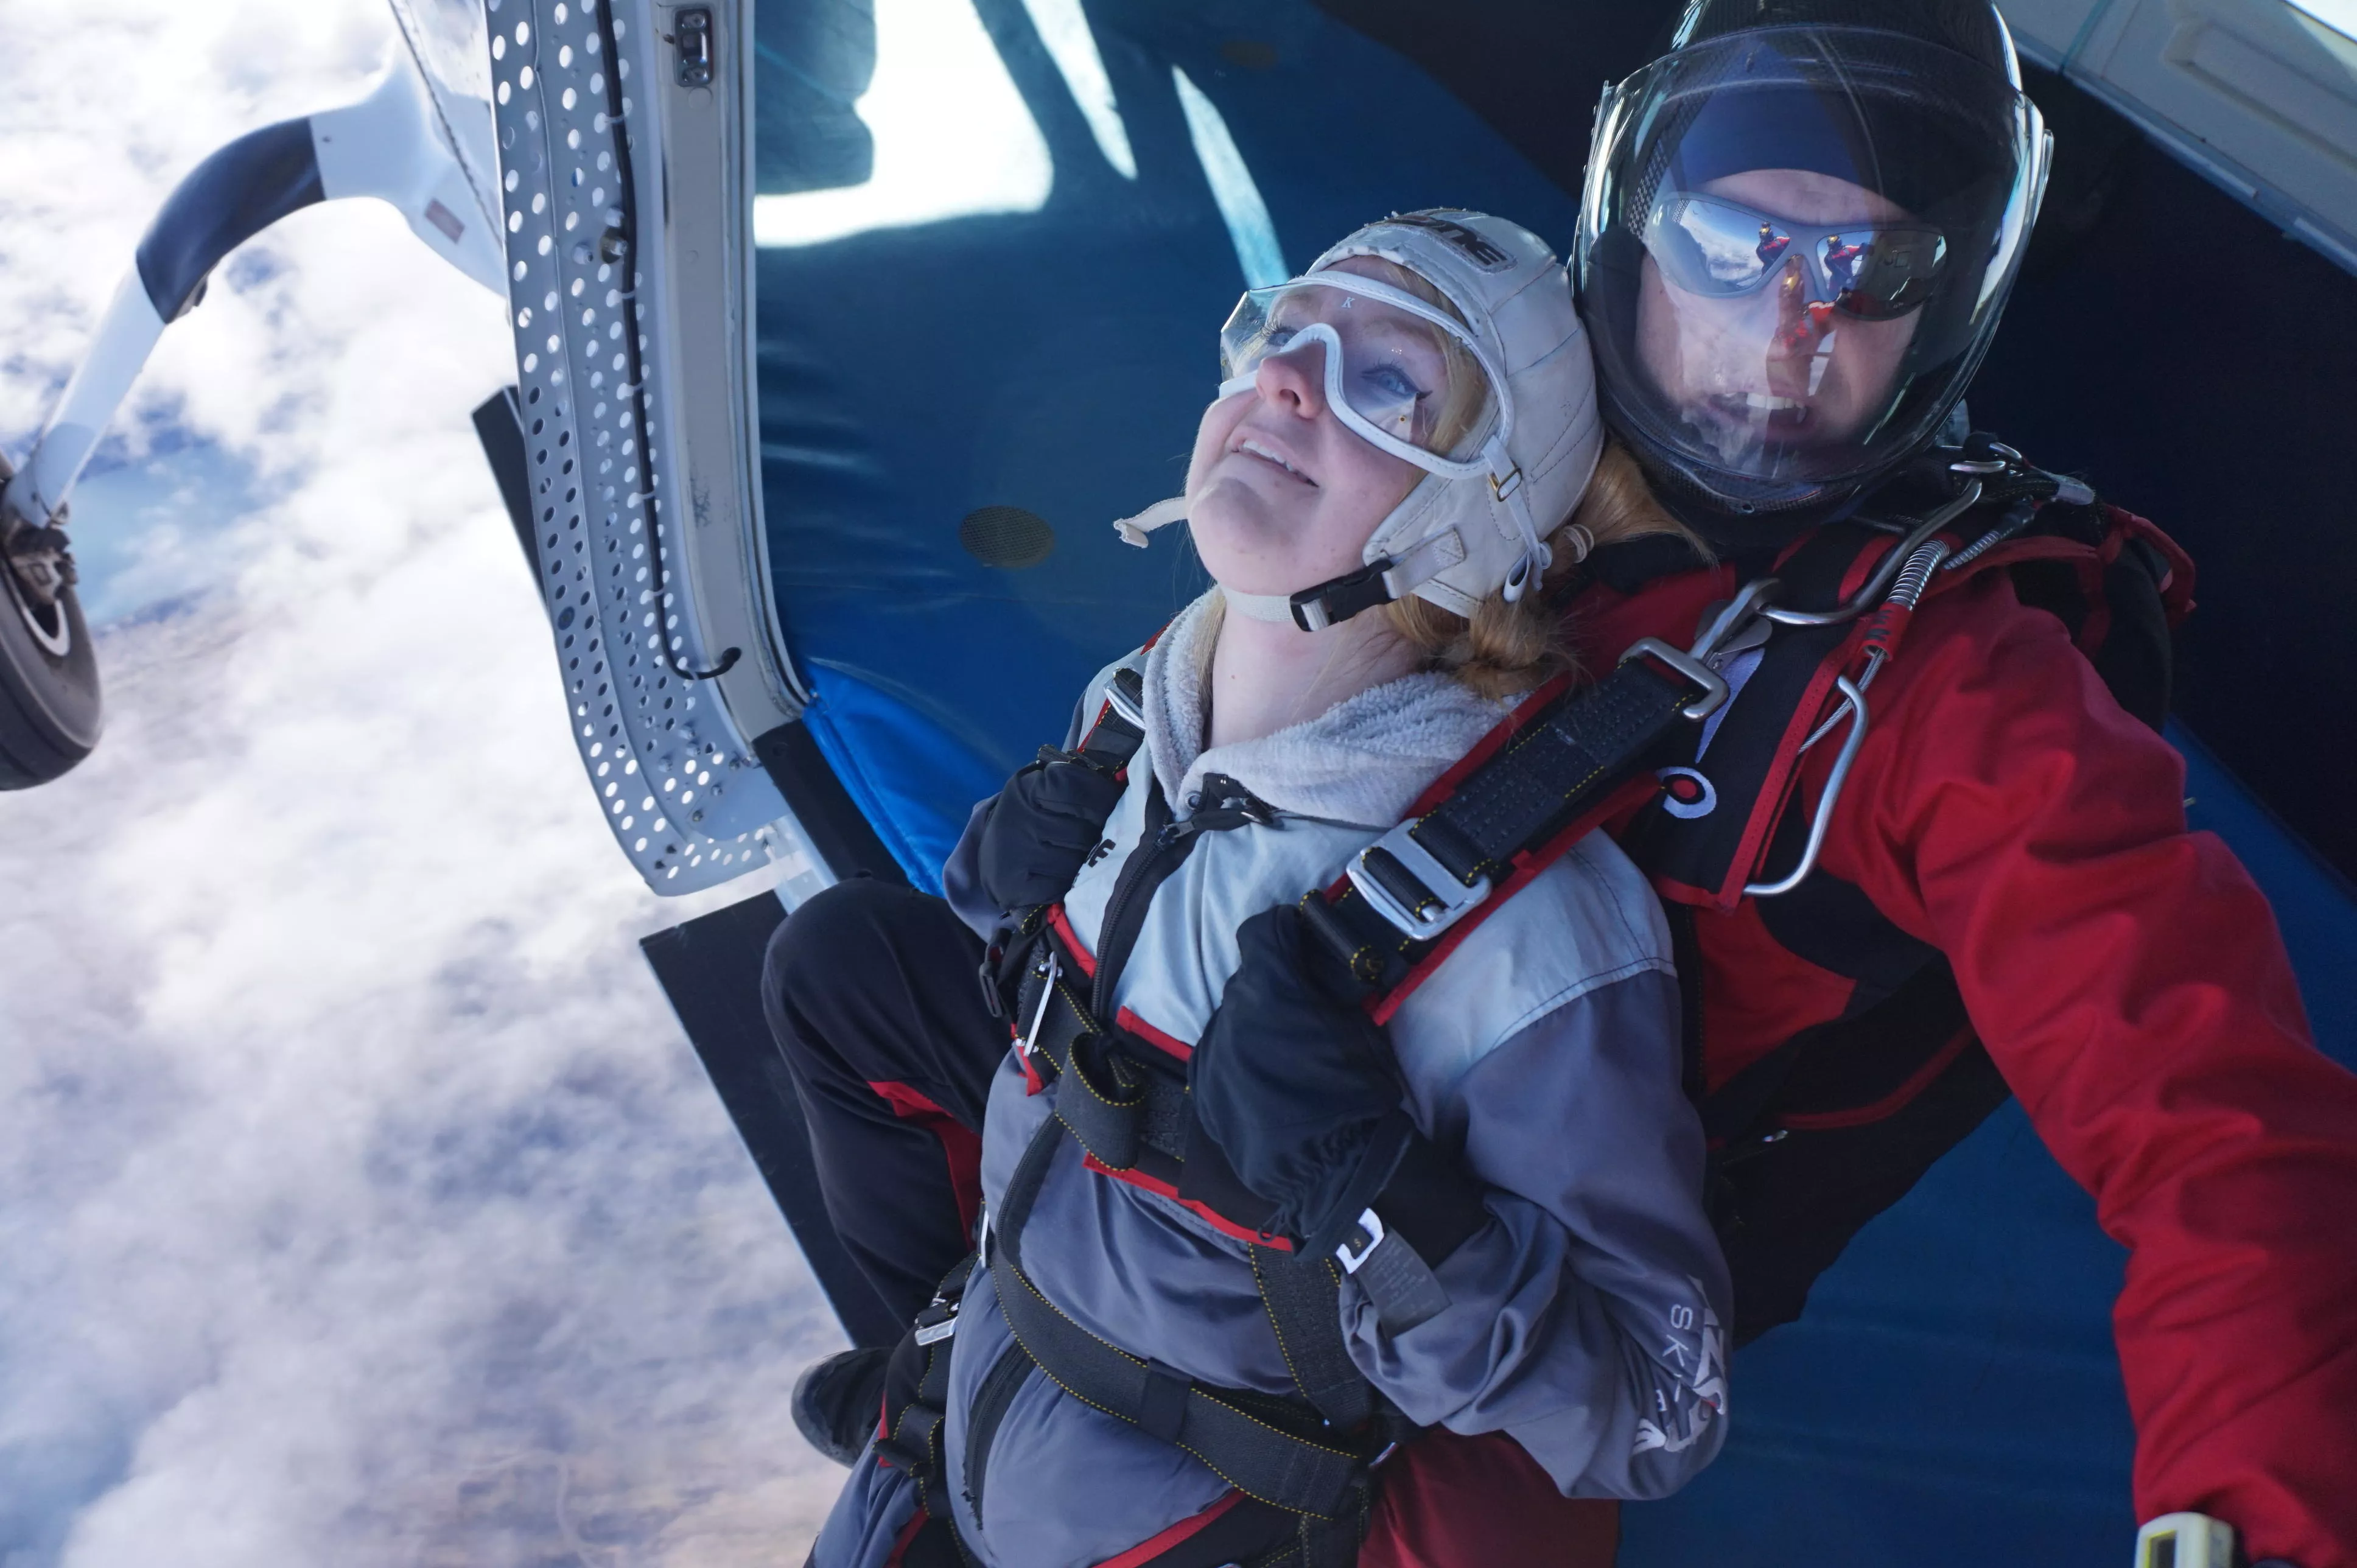 Take off Skydiving in Germany, Europe | Skydiving - Rated 4.5